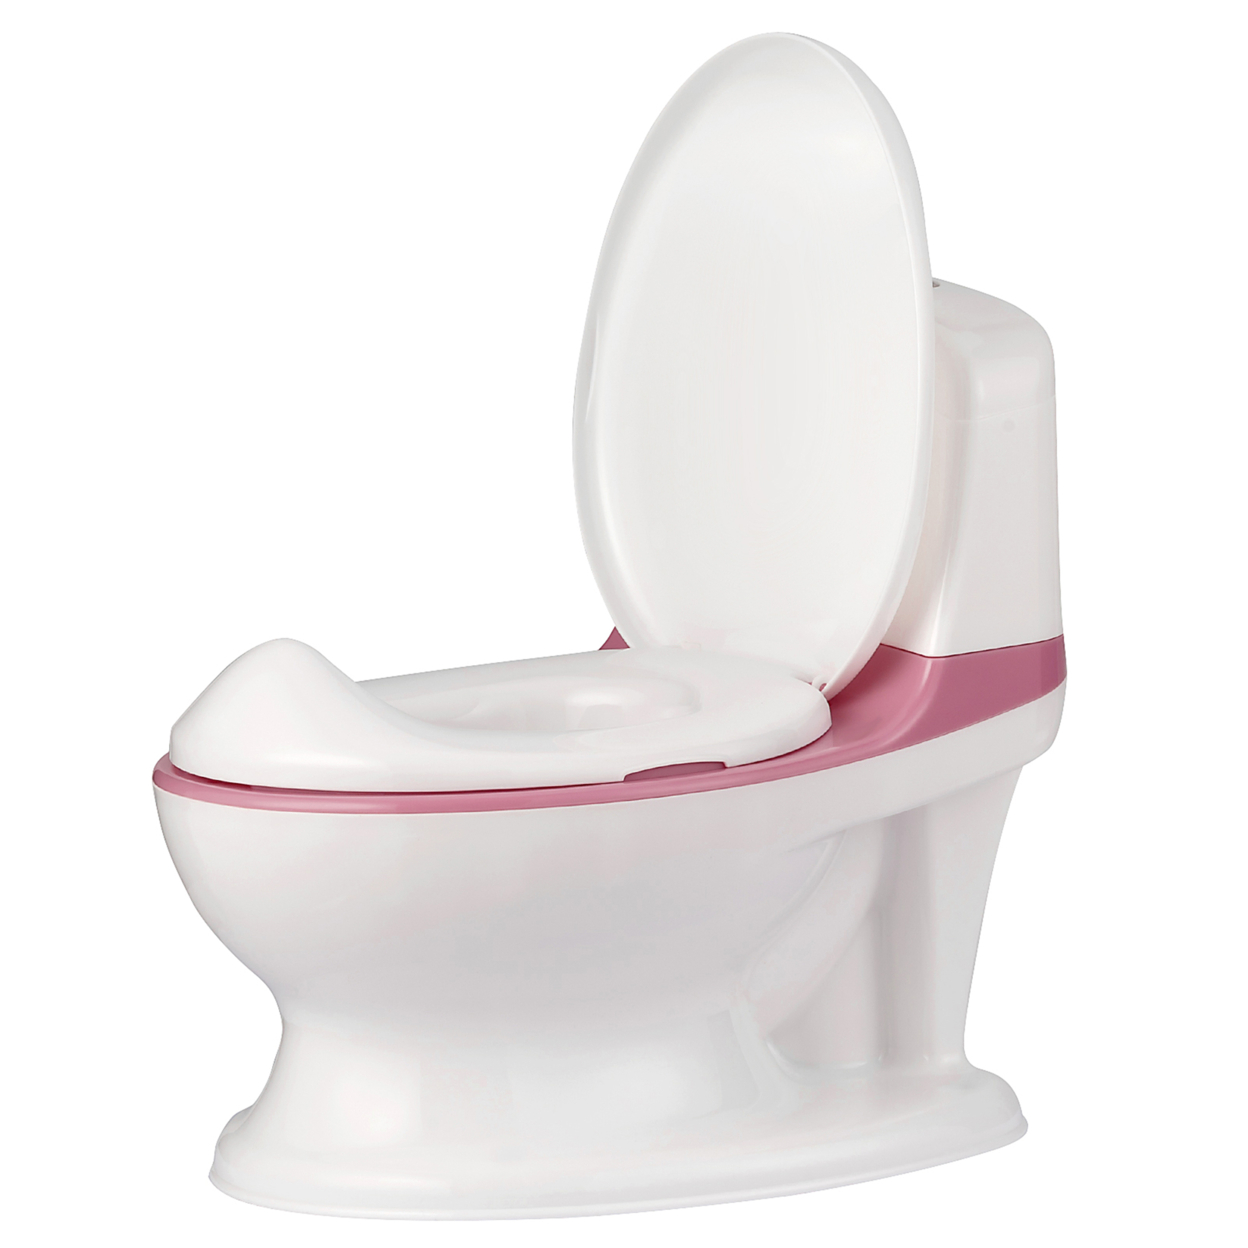 Realistic Potty Training Toilet Kids Toddlers W/ Flush Sound Blue/Gray/Pink - Blue